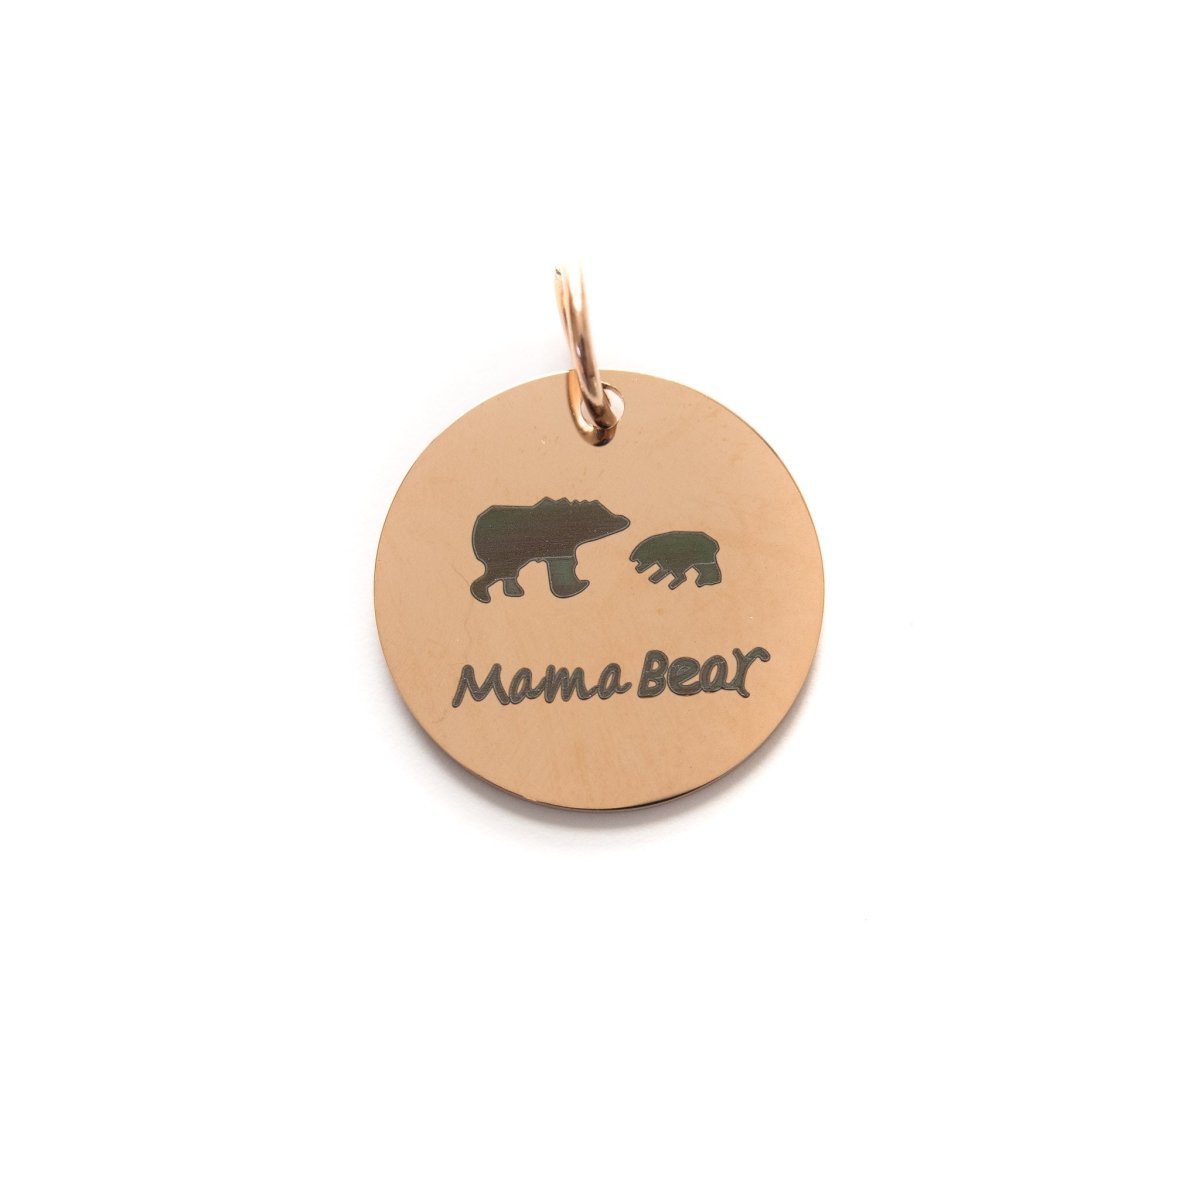 LAST CHANCE Charms - Stainless Steel Mama Bear from Cara & Co Craft Supply